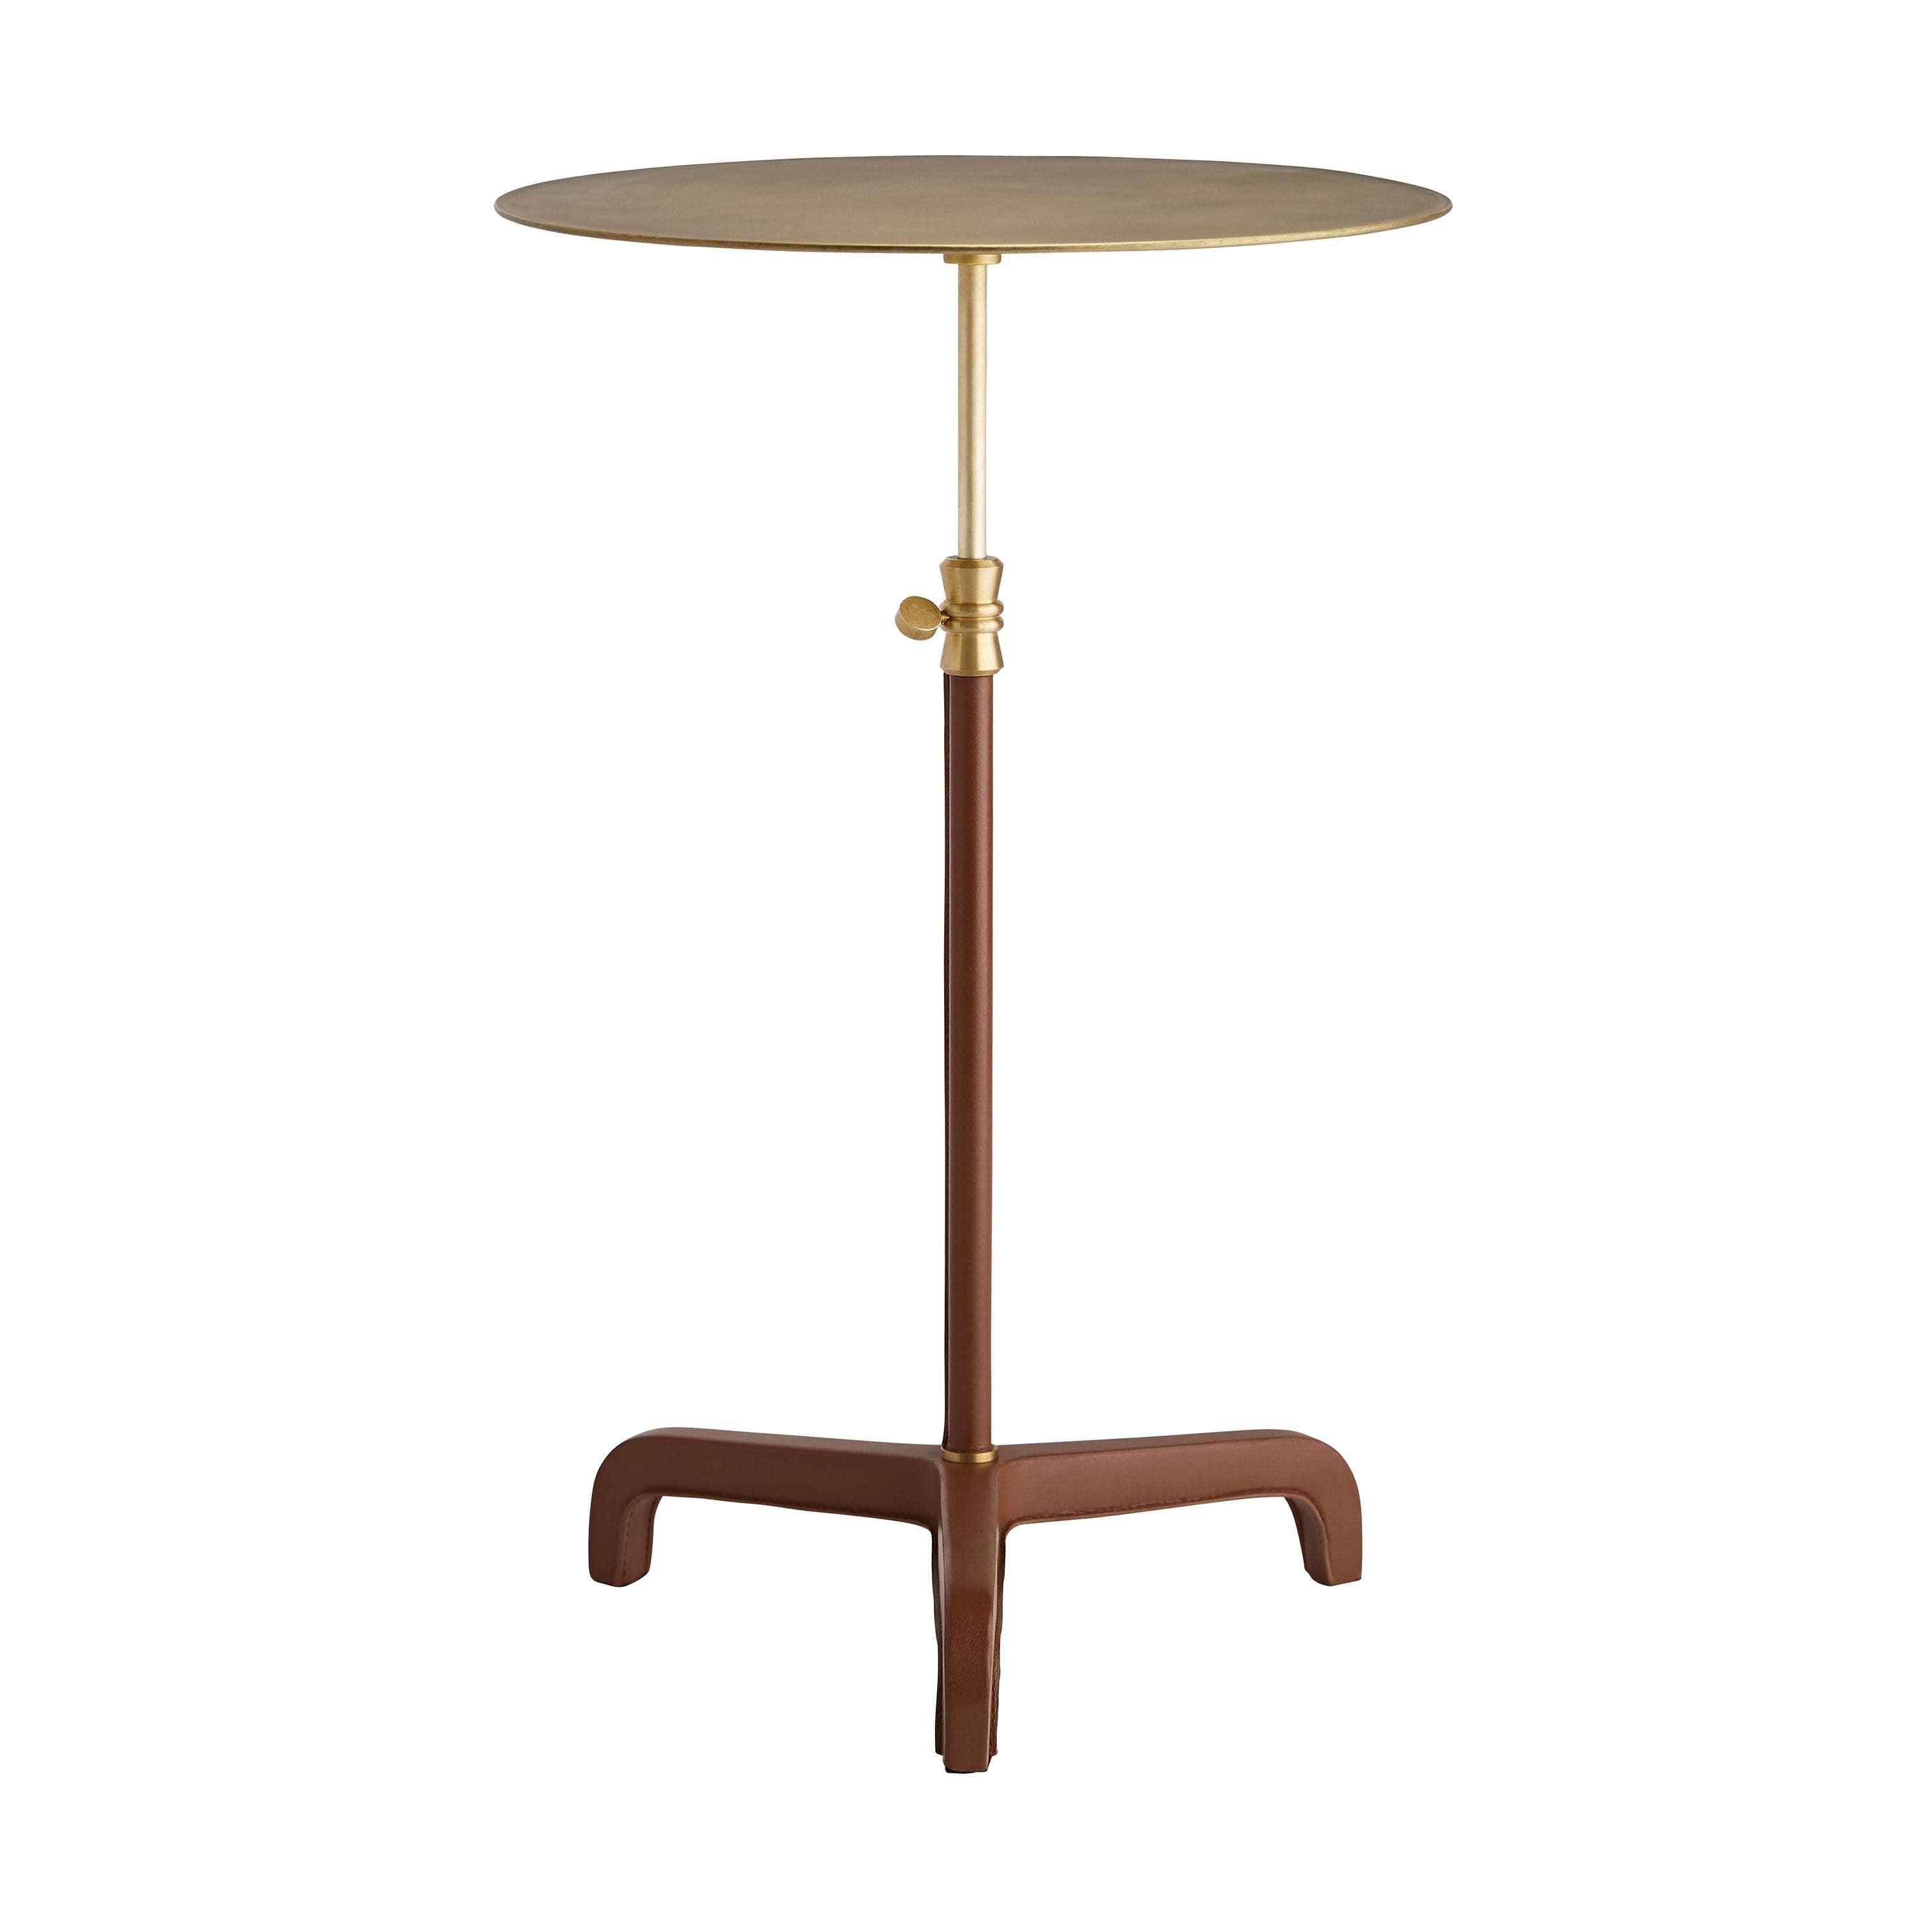 ADDISON LARGE ACCENT TABLE